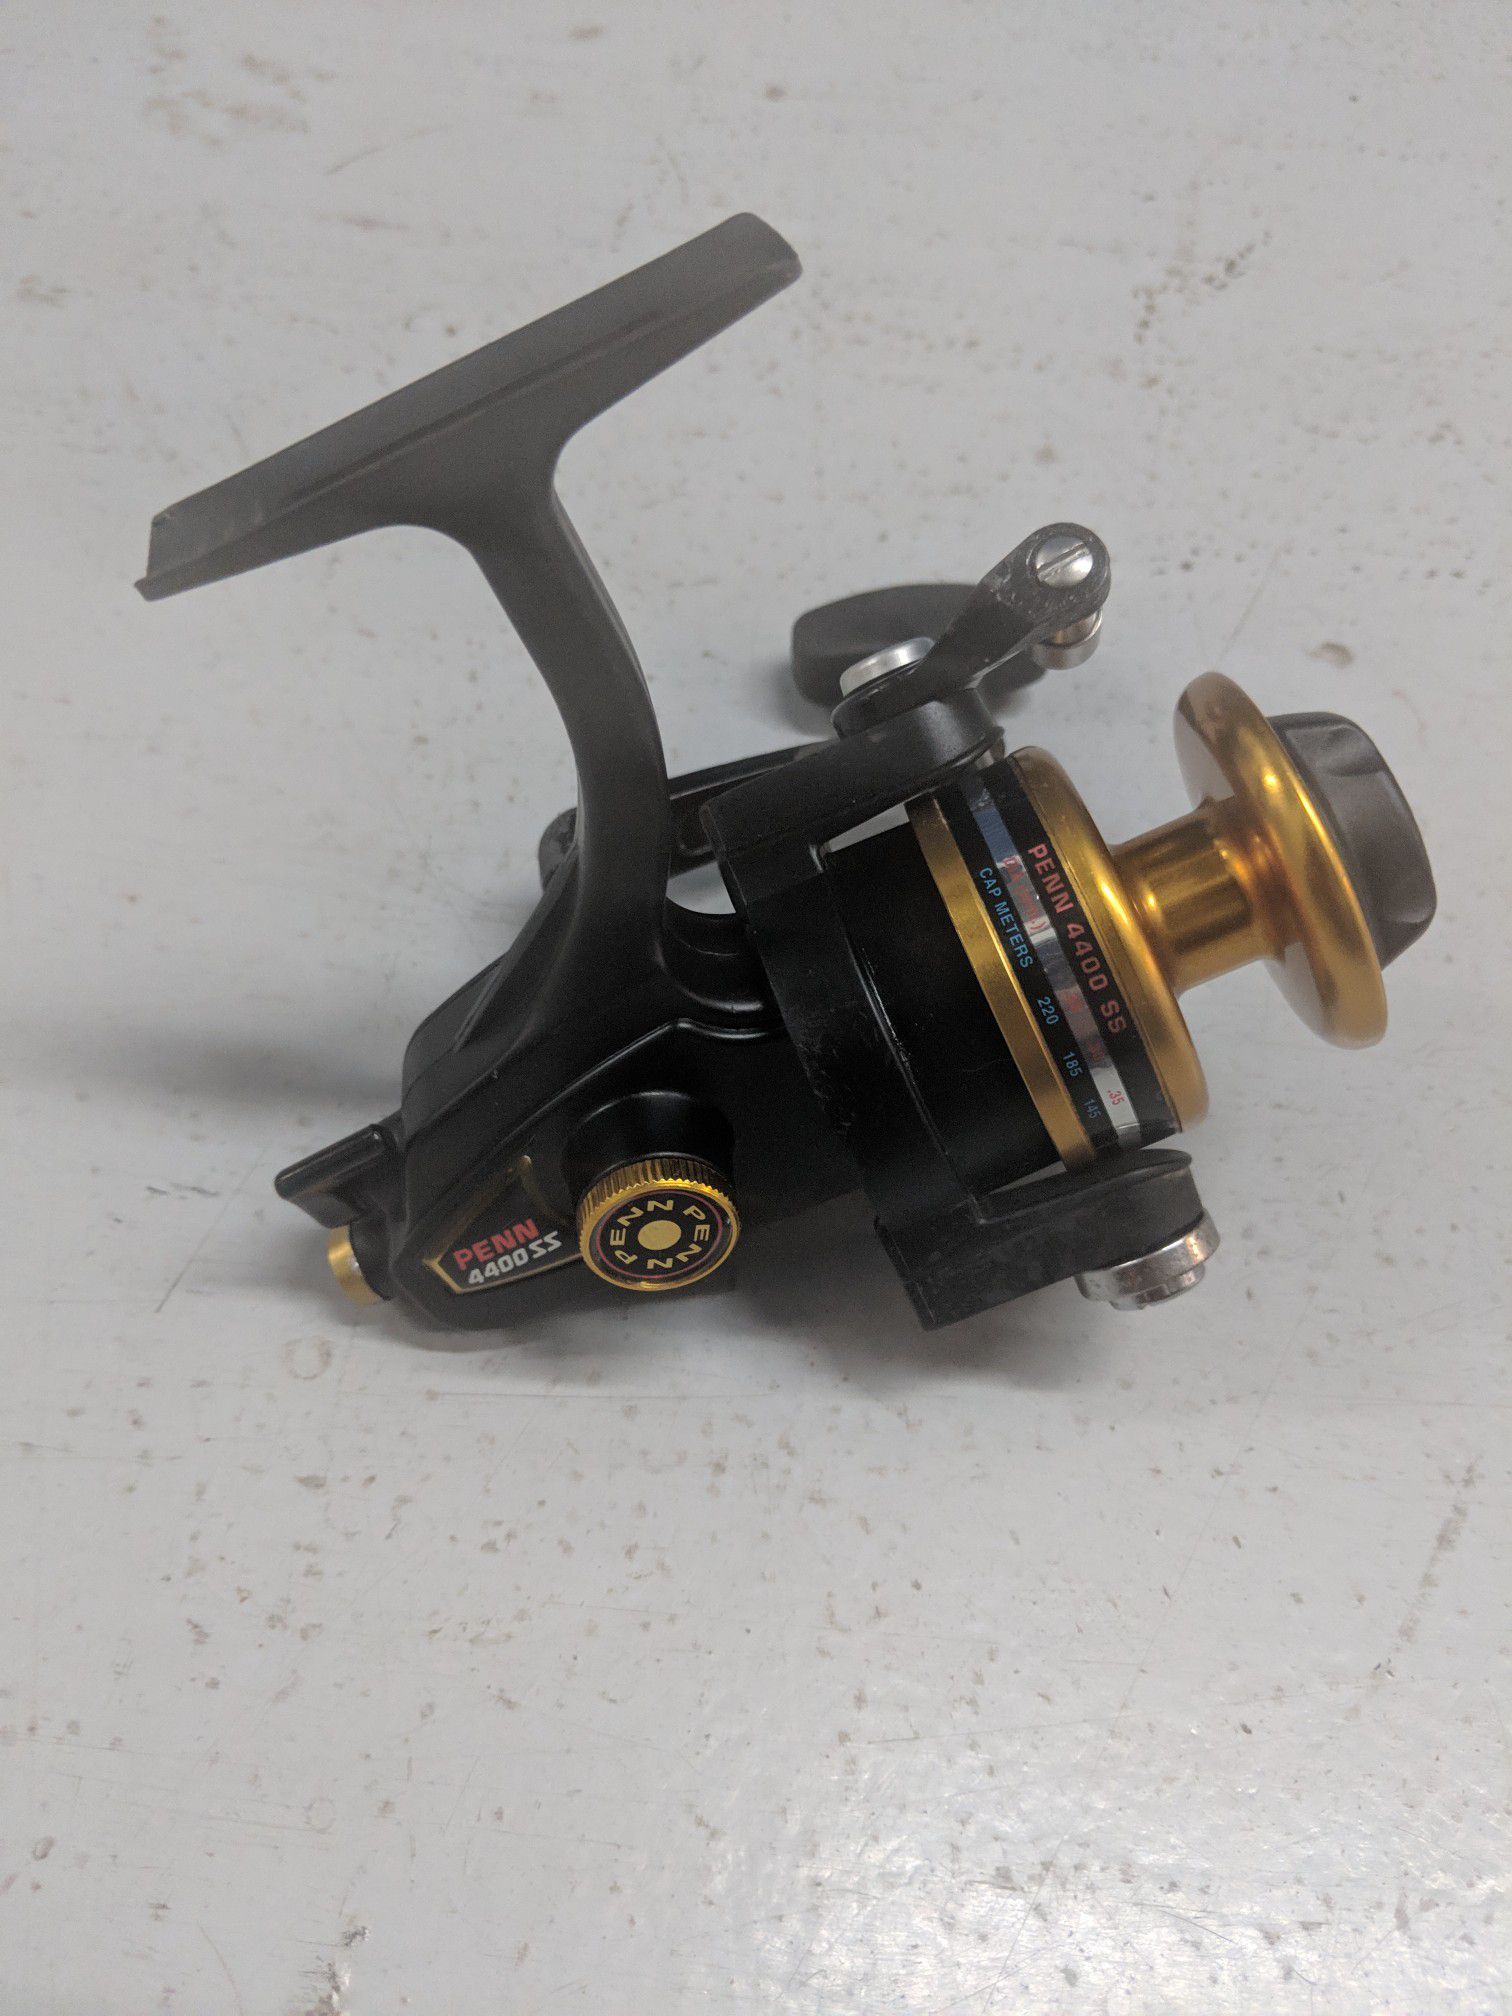 Penn 4400 SS Spinning Reel. Nice Condition. Ready for fishing.